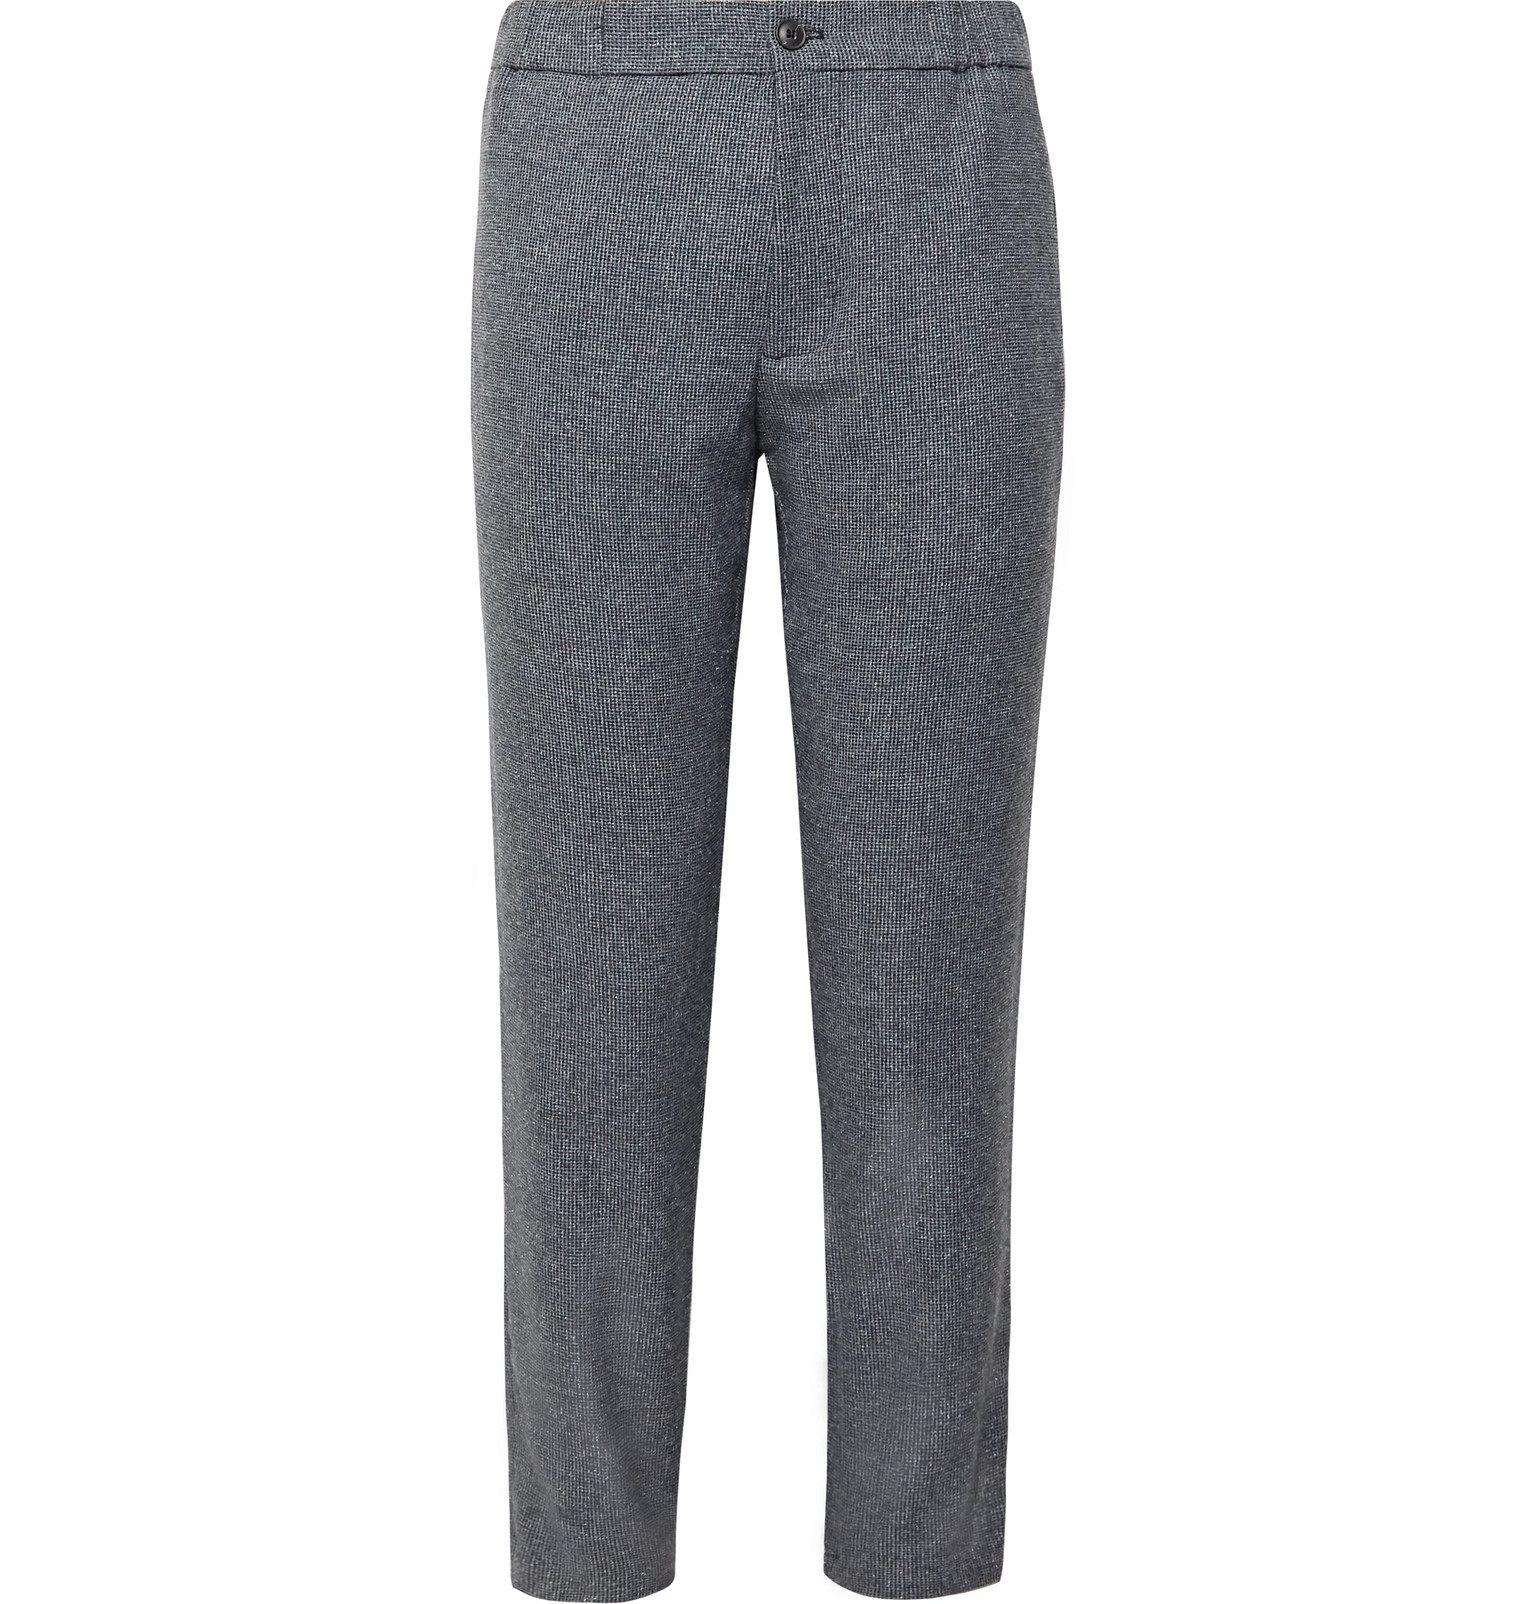 Club Monaco - Lex Tapered Donegal Tweed Trousers - Men - Gray | The ...